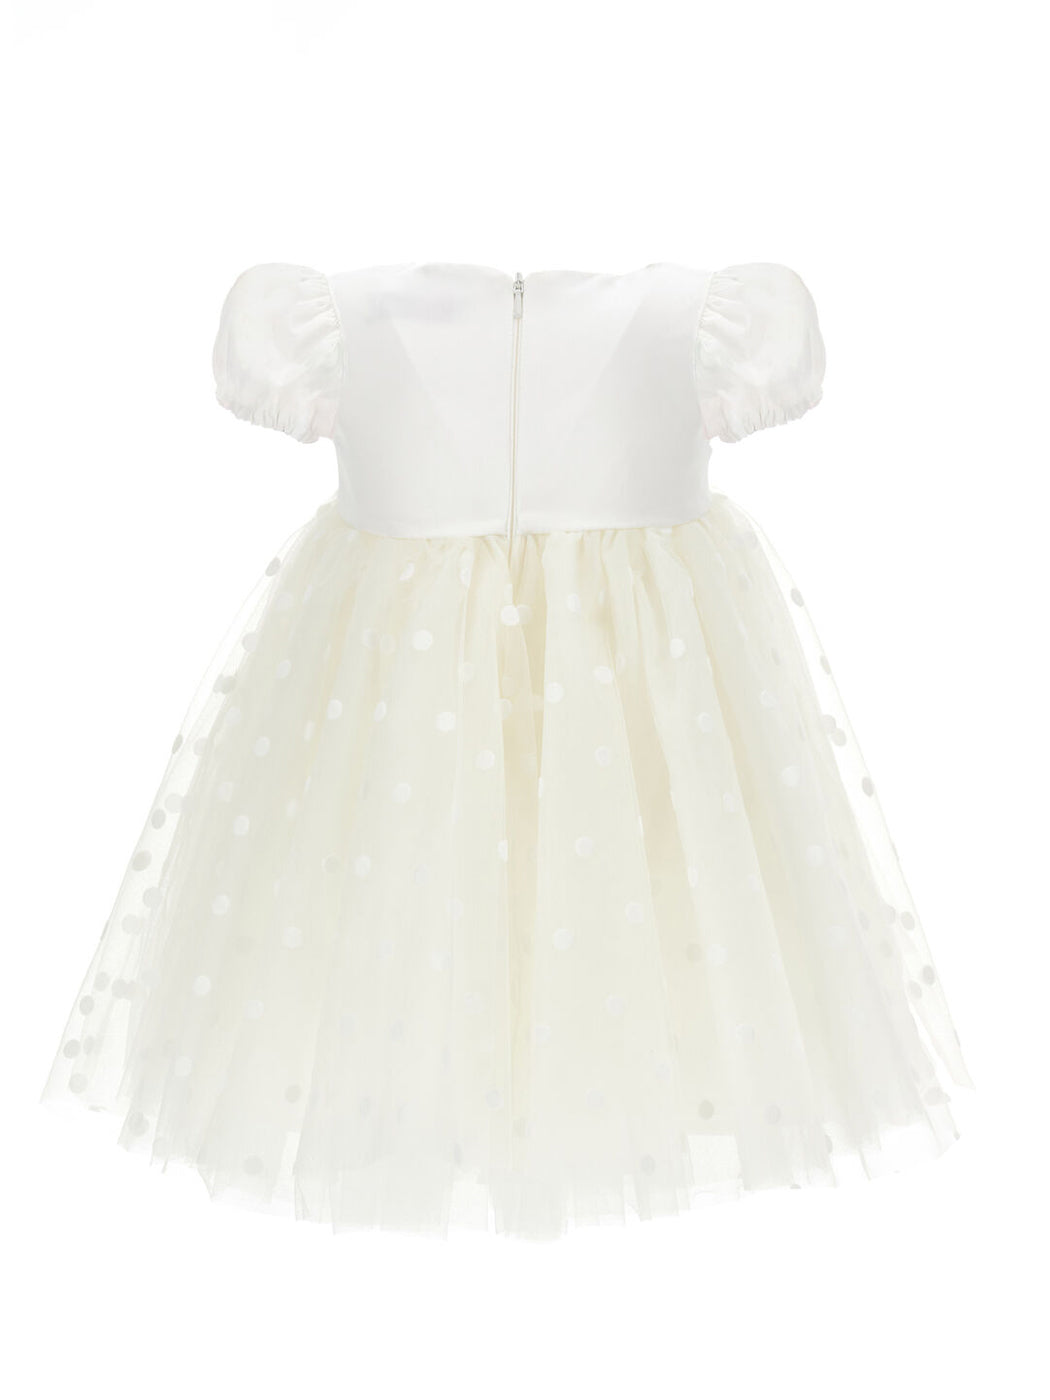 Baby tulle dress with appliquéd flowers